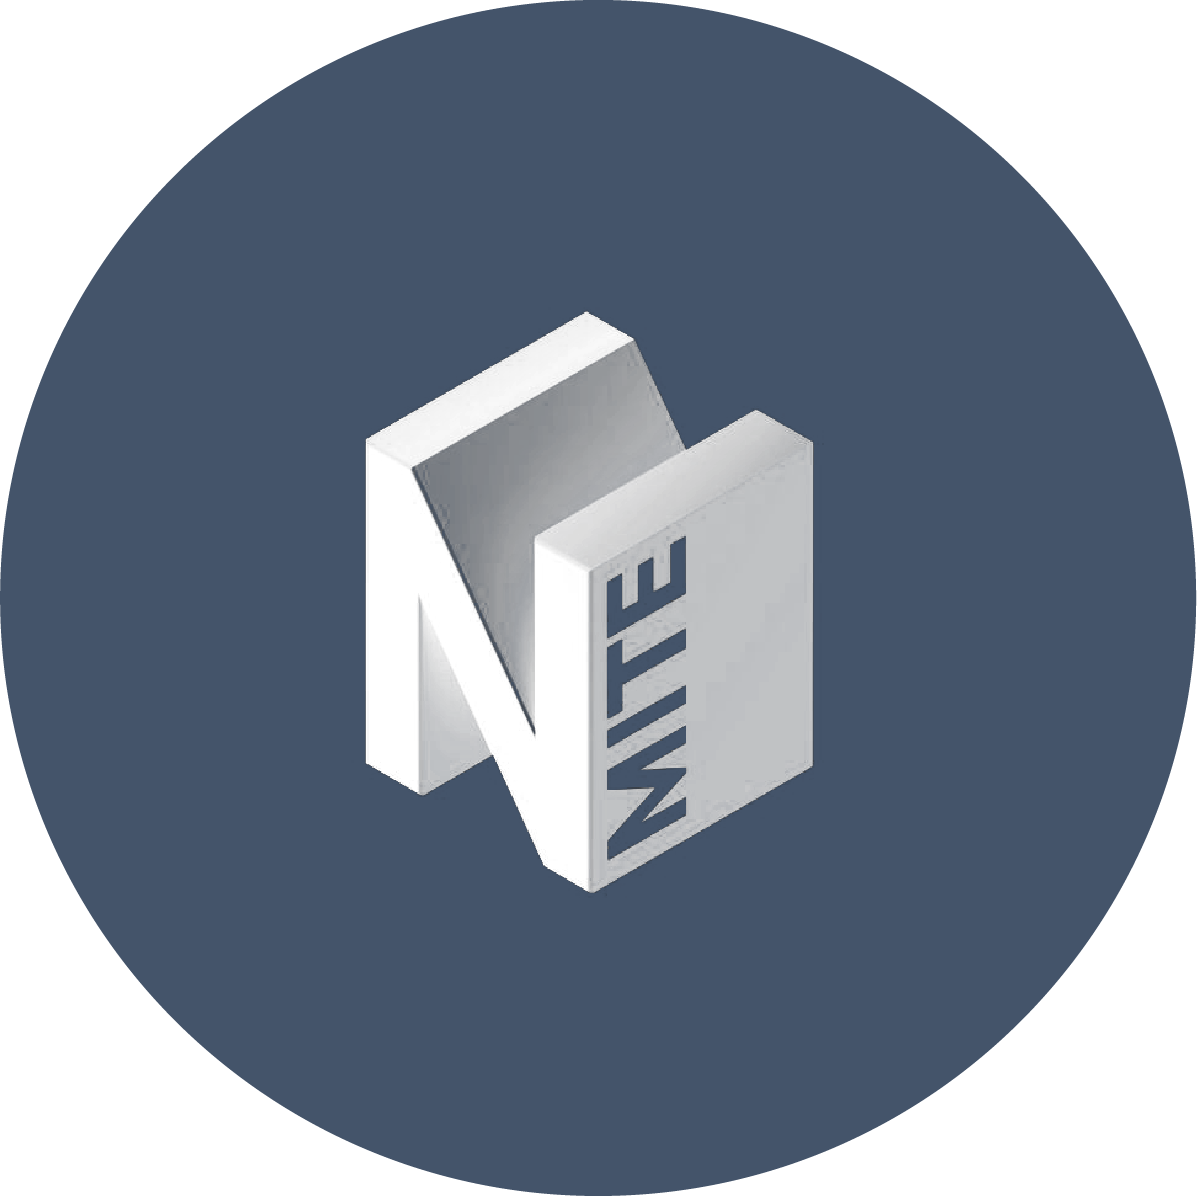 NMITE logo in white and in blue circle